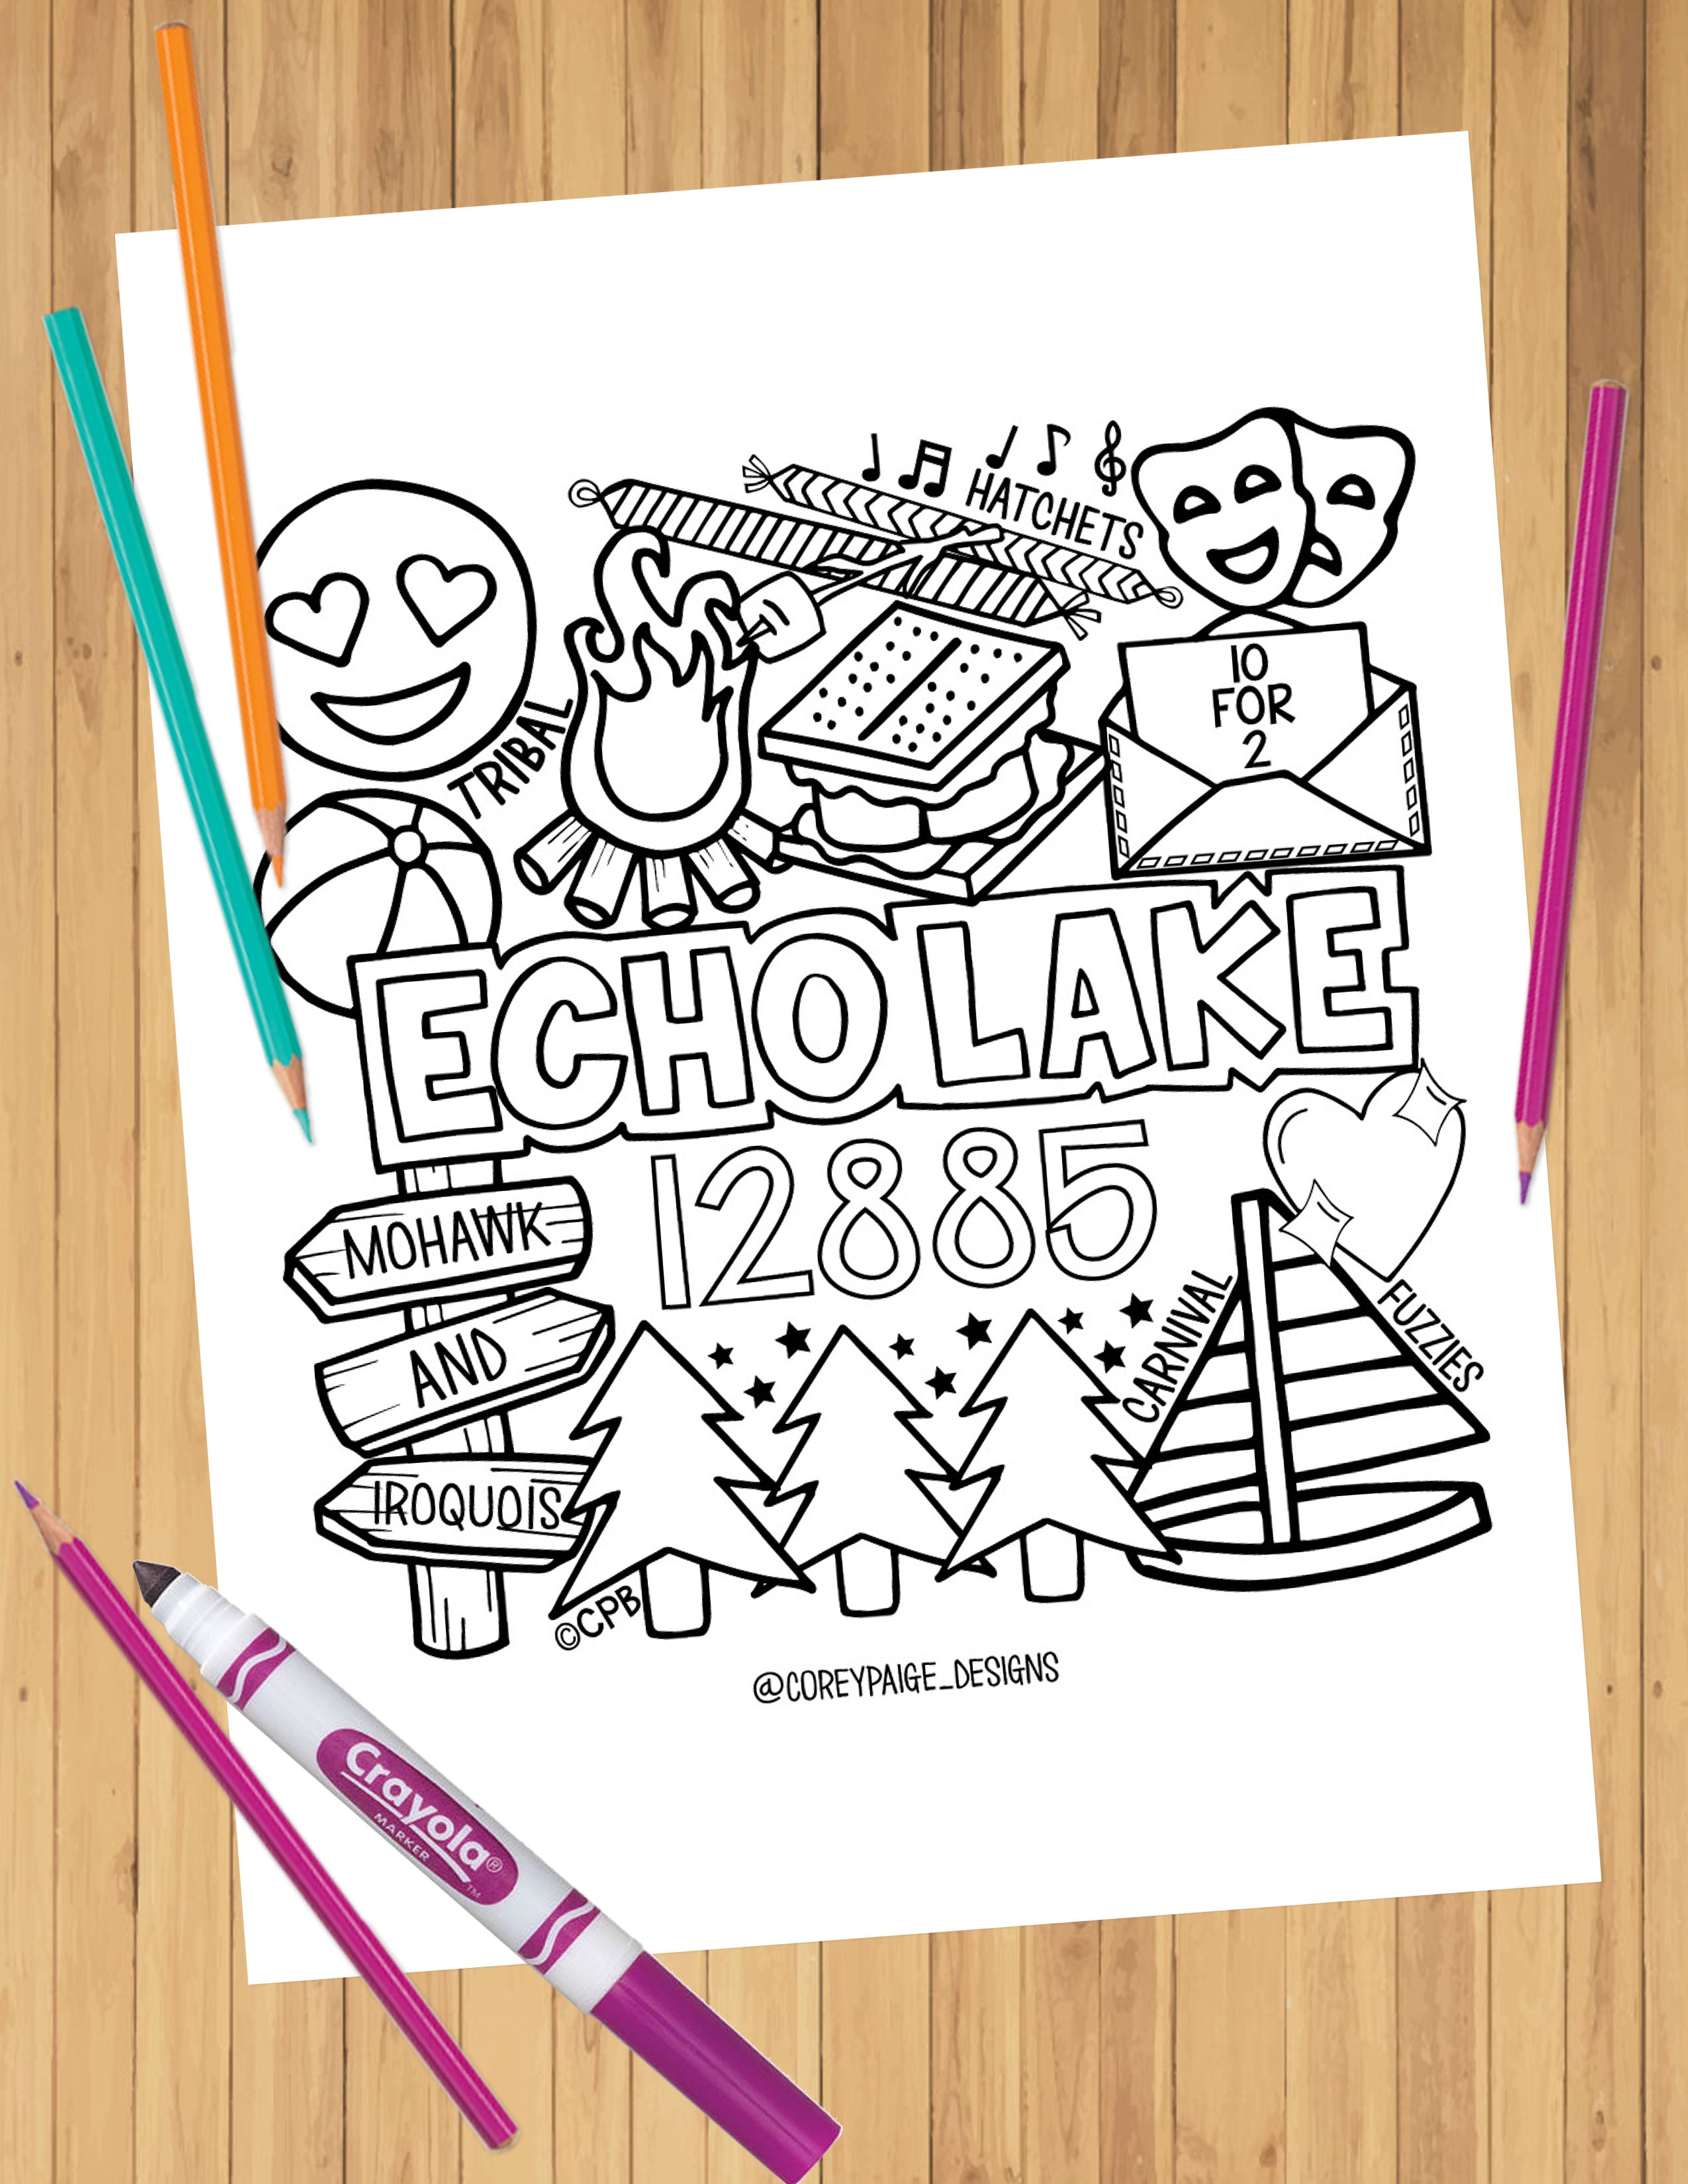 Camp Collage Coloring Sheets